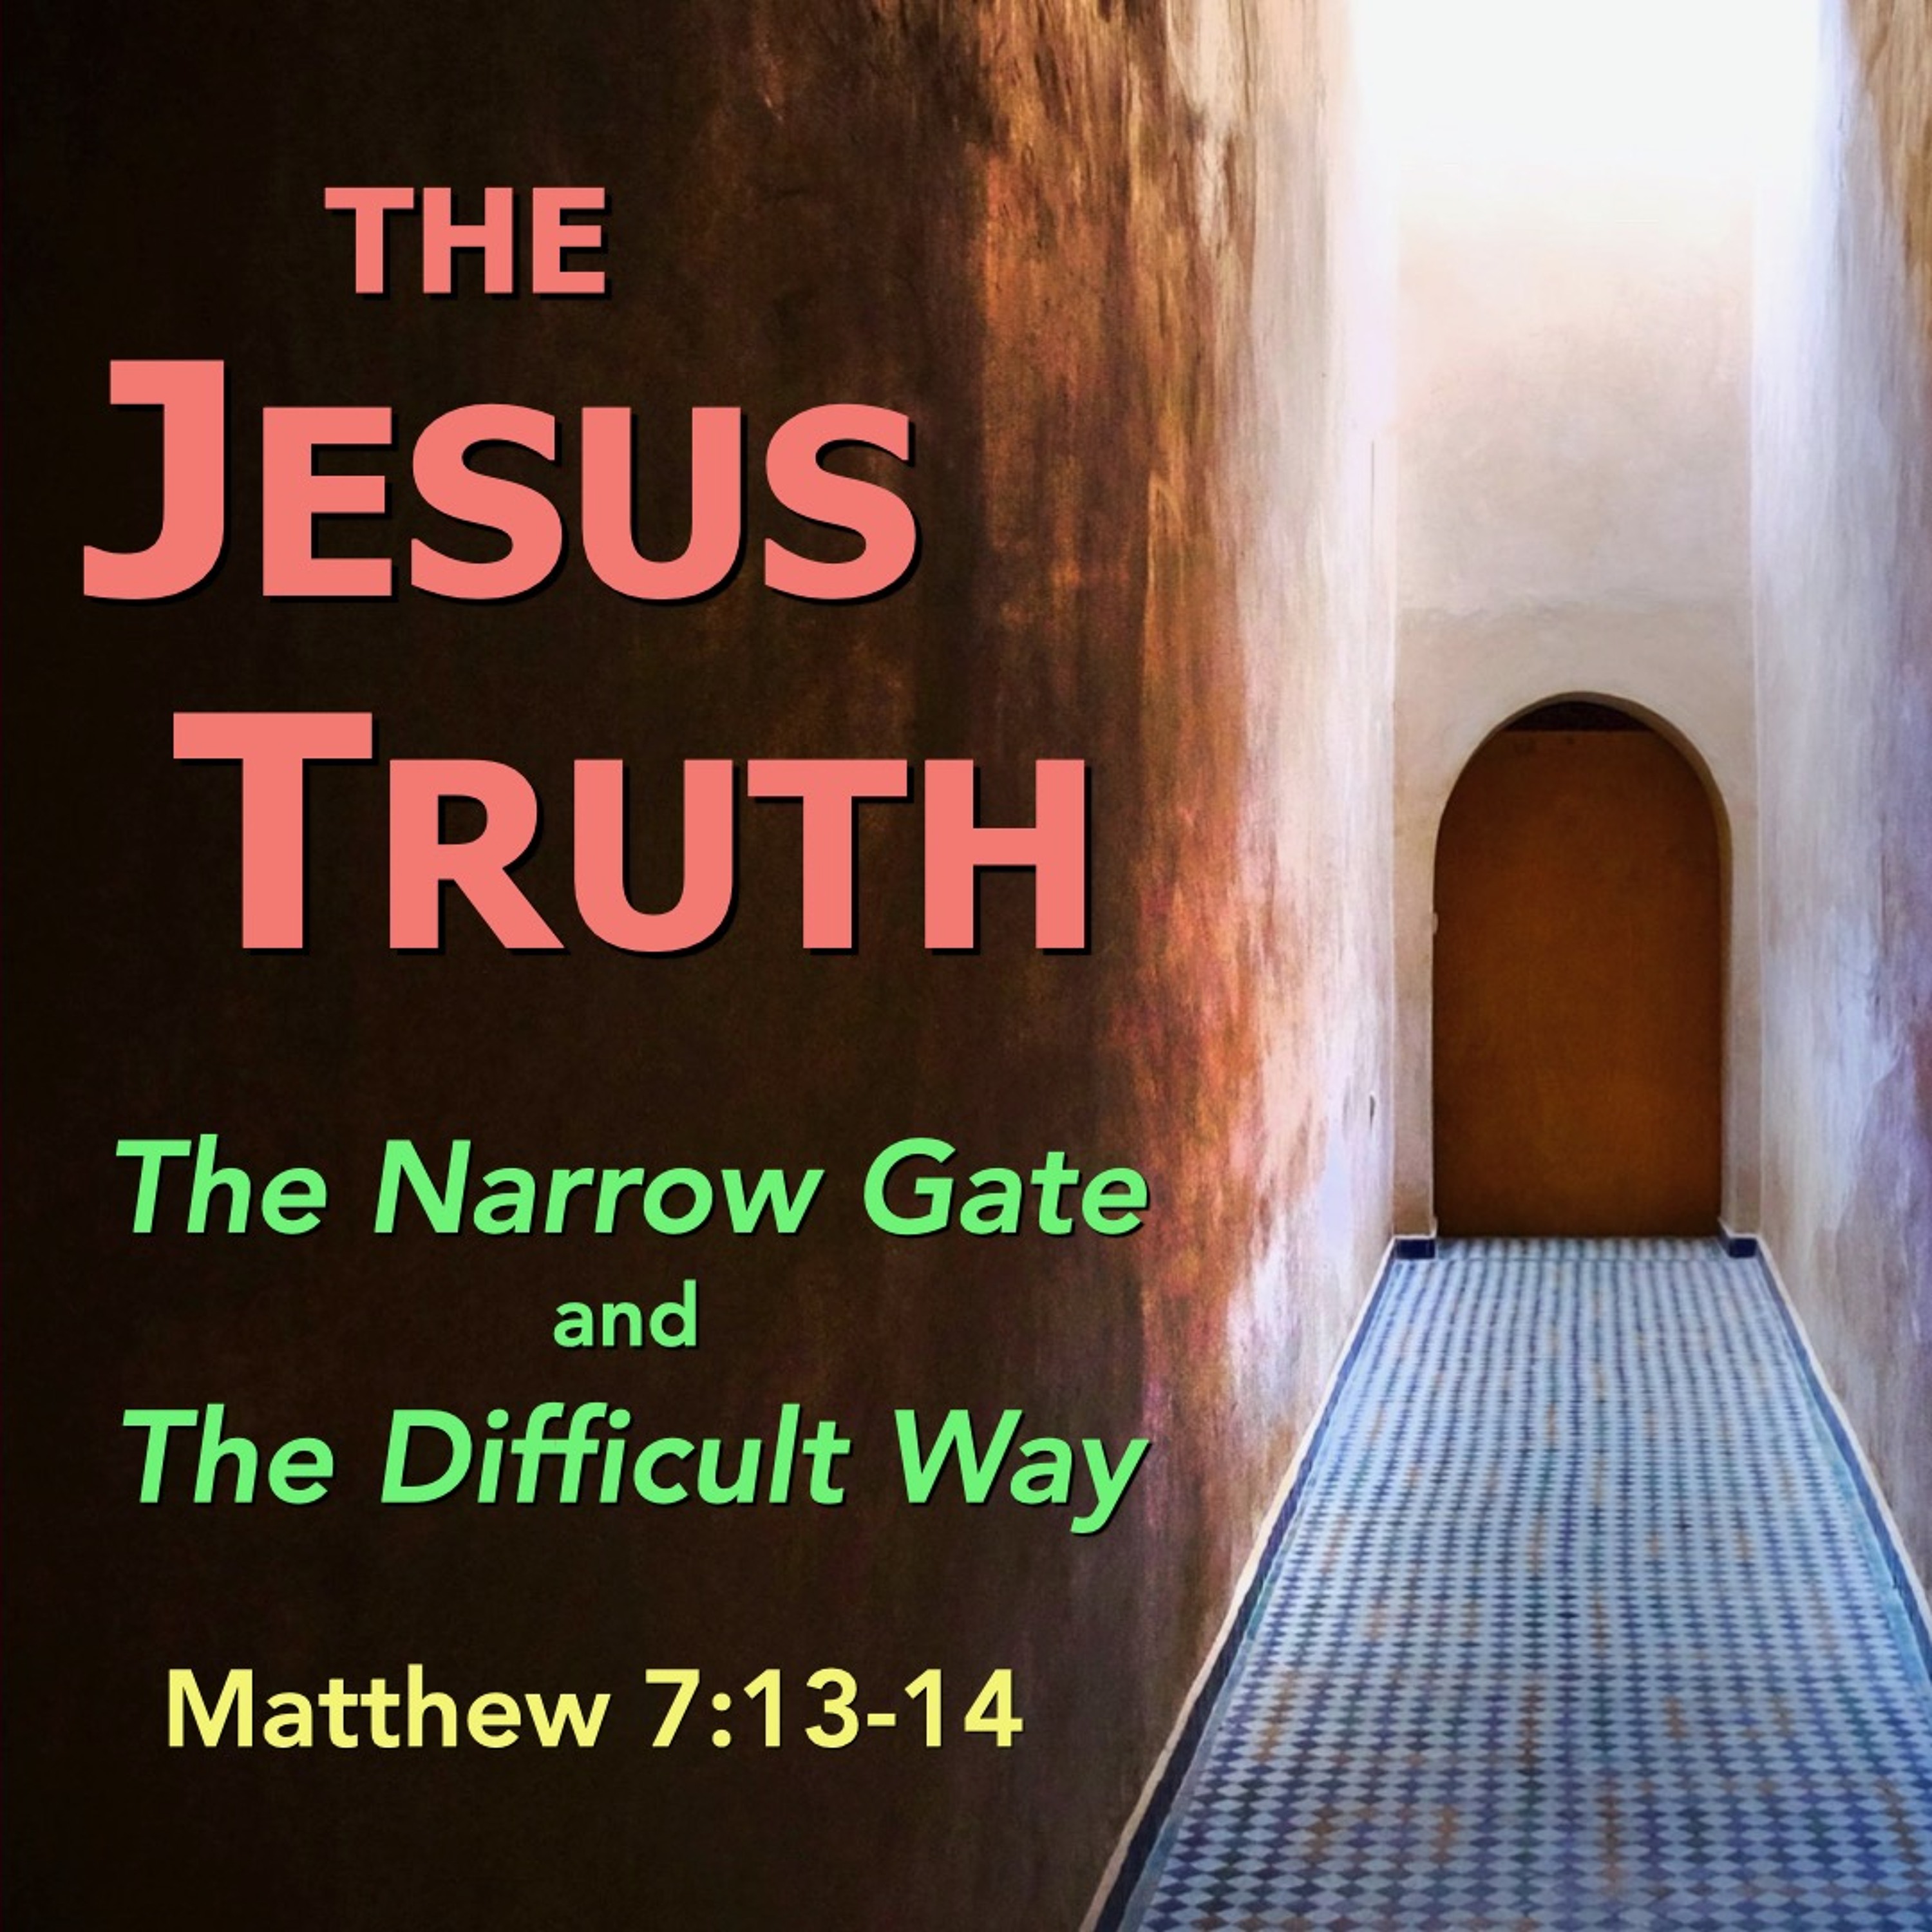 9-17-23 The Jesus Truth - The Narrow Gate and the Difficult Way